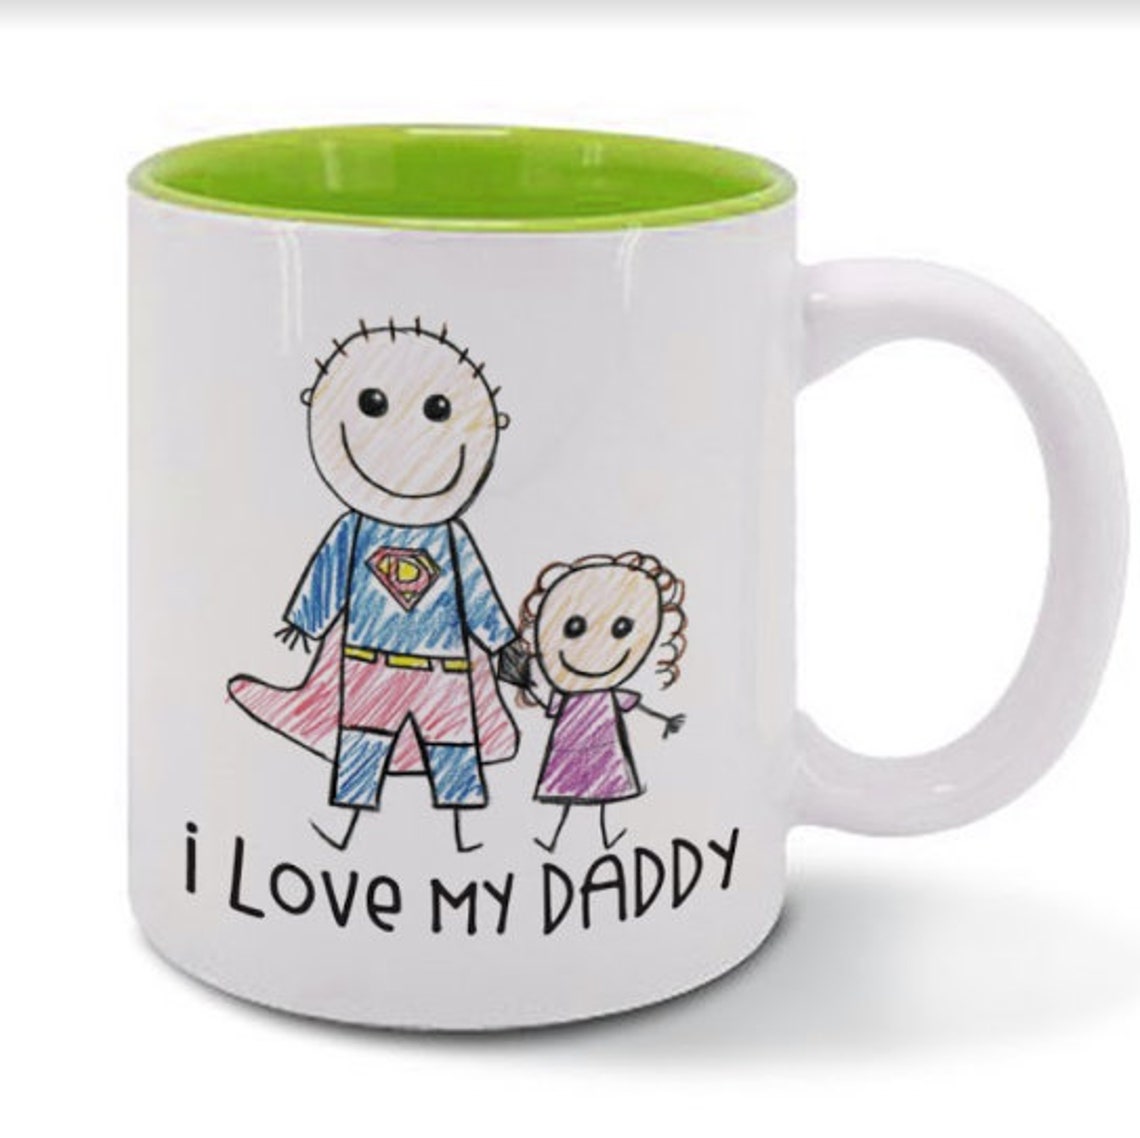 I love my DADDY cup fathers day gift mug personalised | Etsy